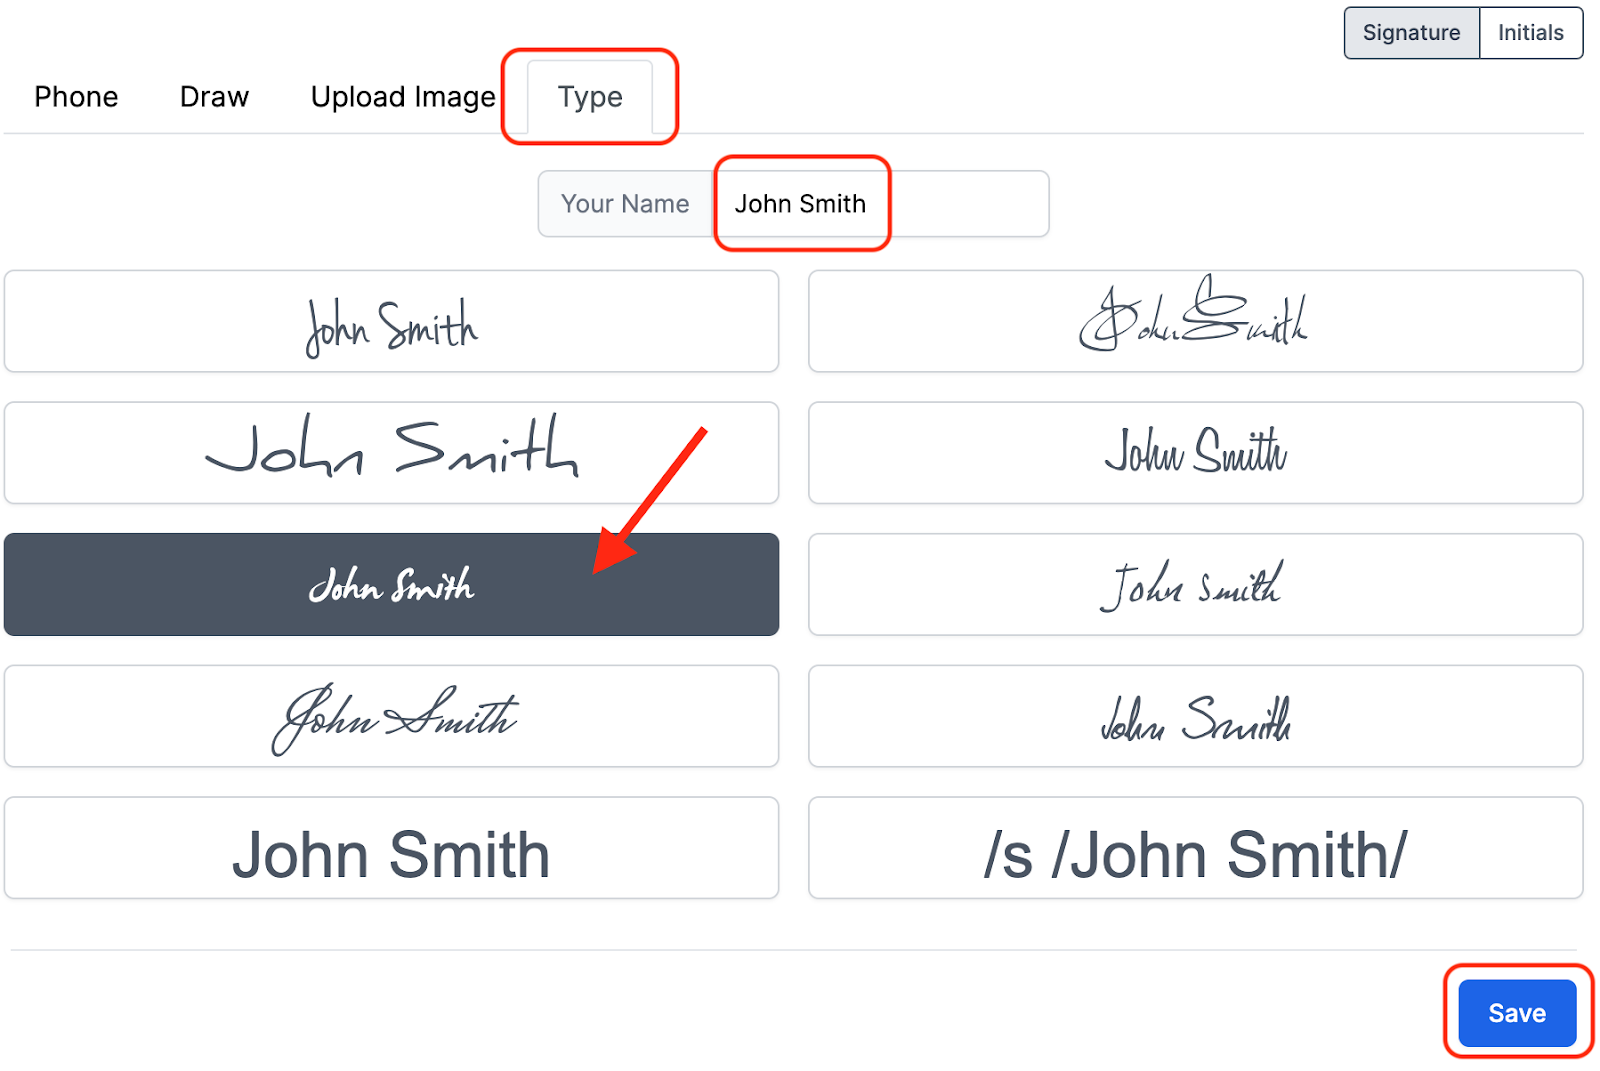 DocHub Signature tool Type option showing signatures for the name John Smith.